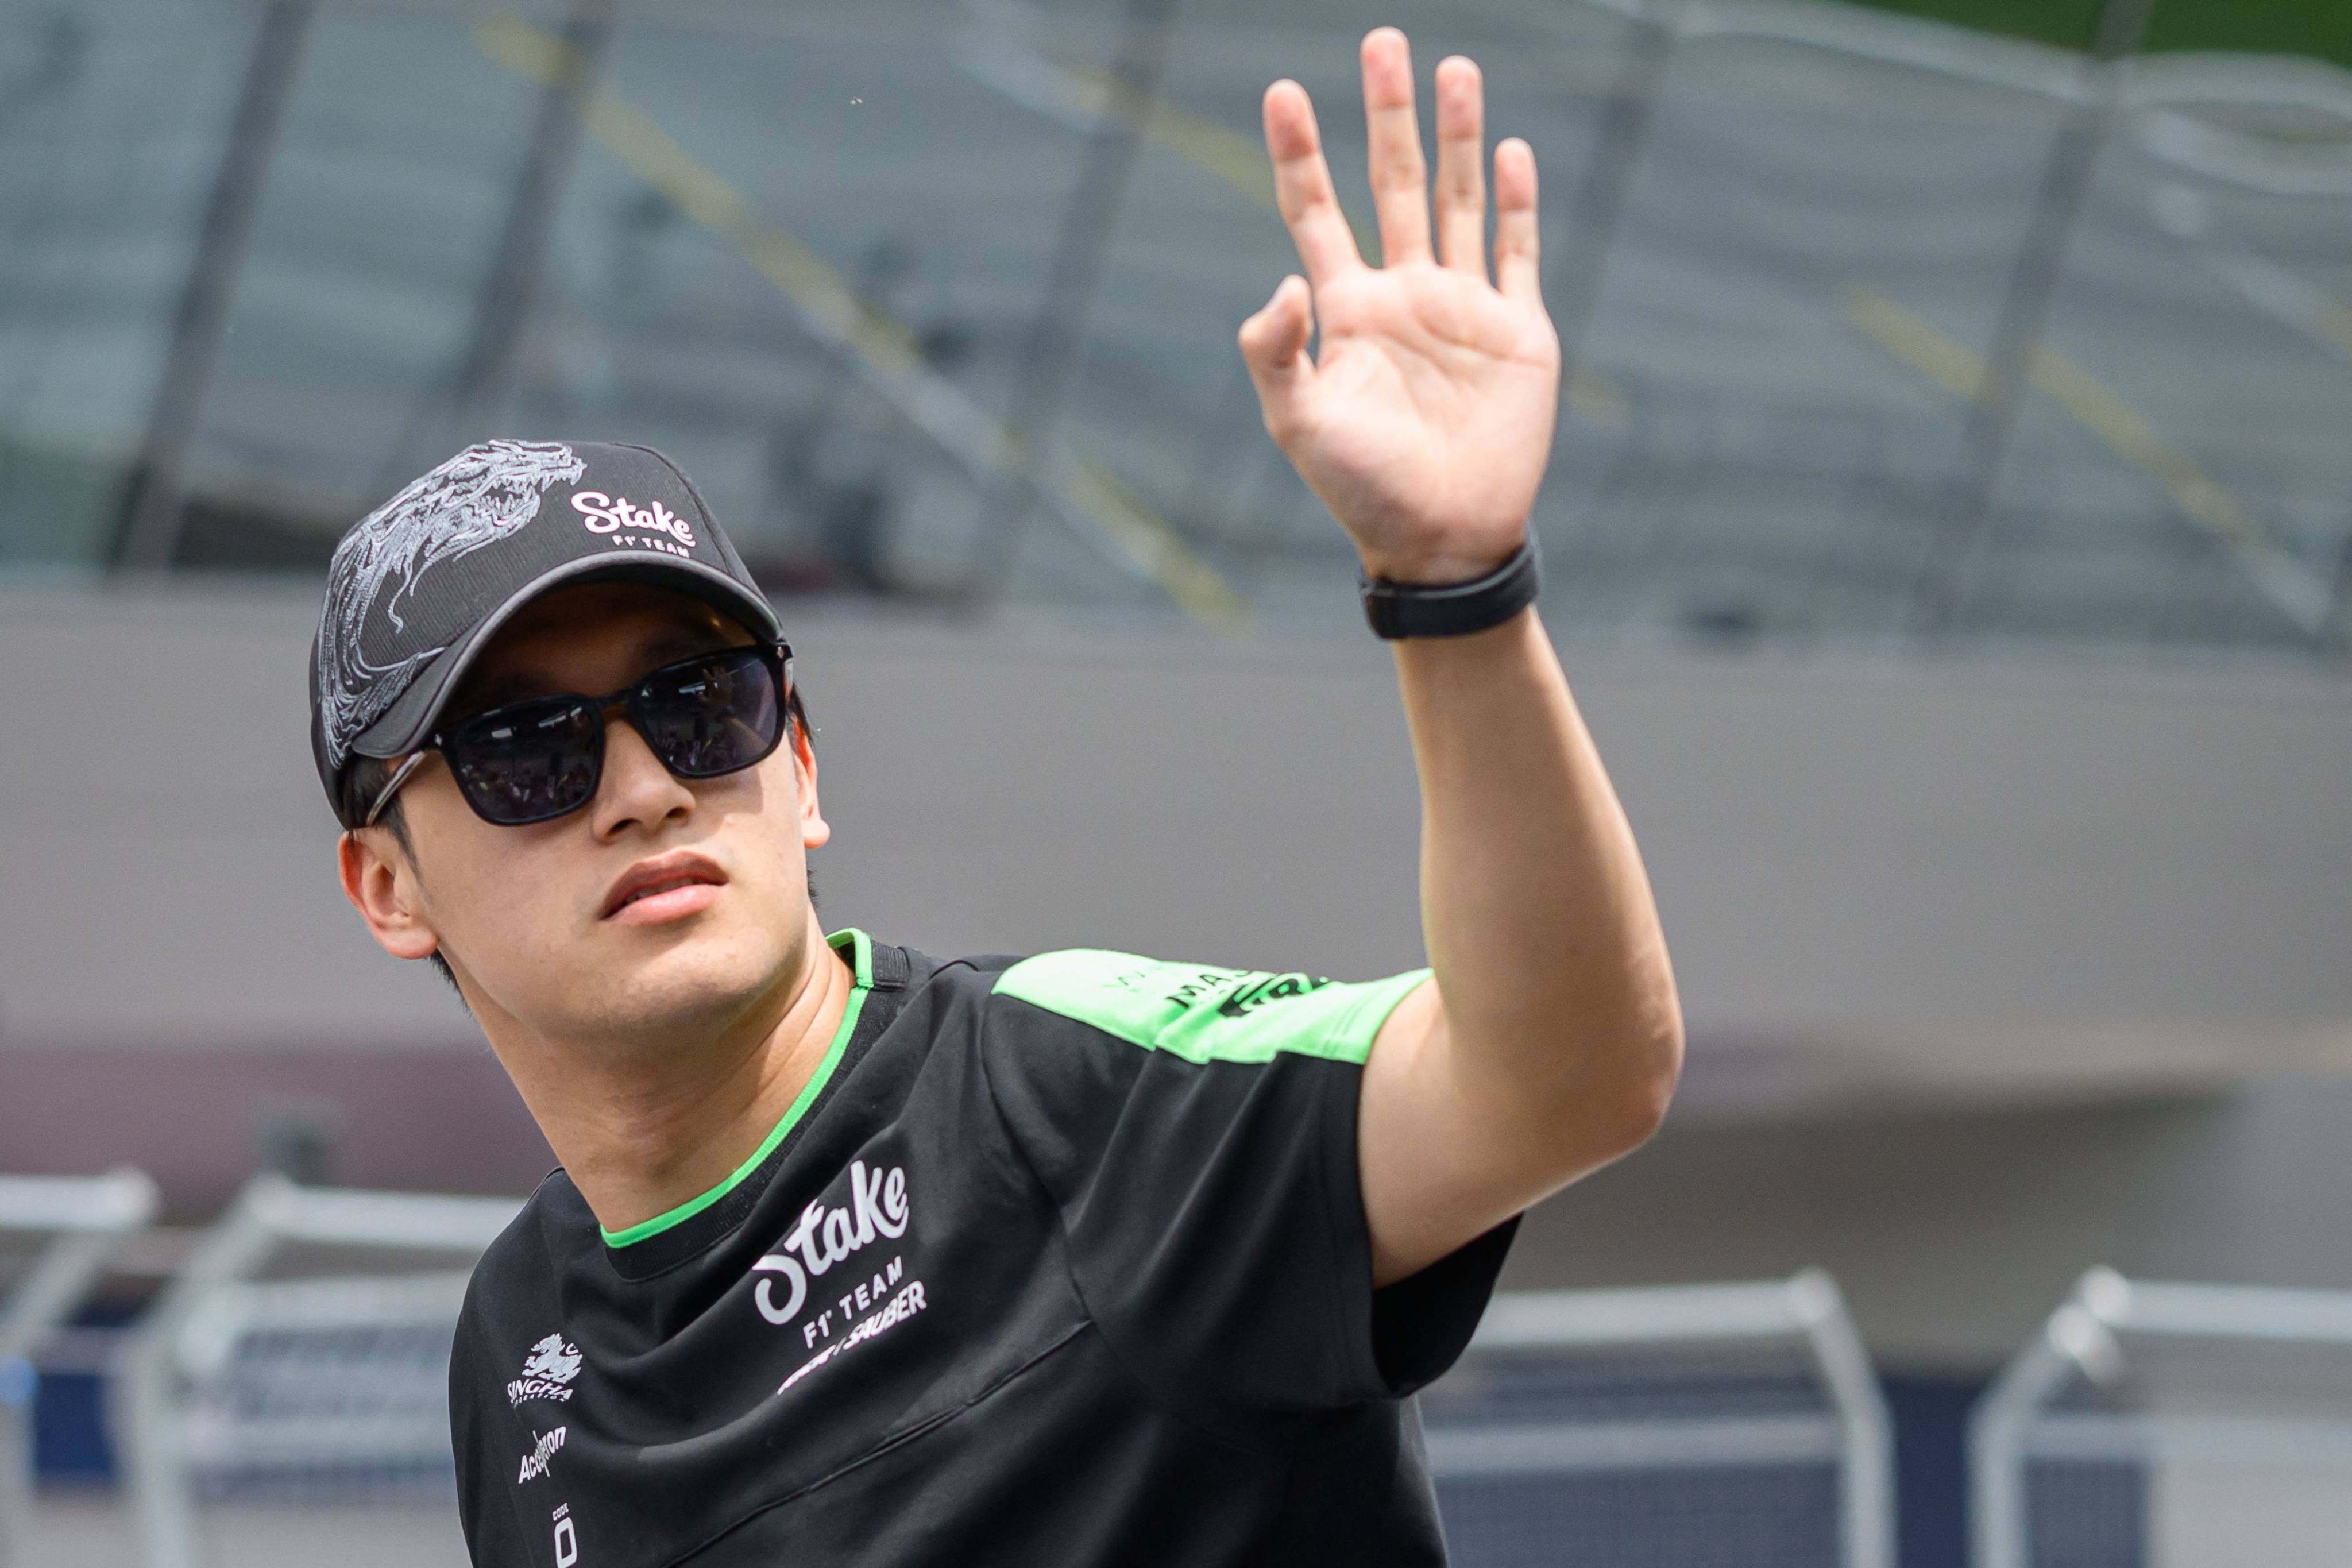 Sauber’s Chinese driver Zhou Guanyu, seen here at the Drivers Parade of this weekend’s Austrian Grand Prix, faces an uncertain future in Formula One. Photo: AFP